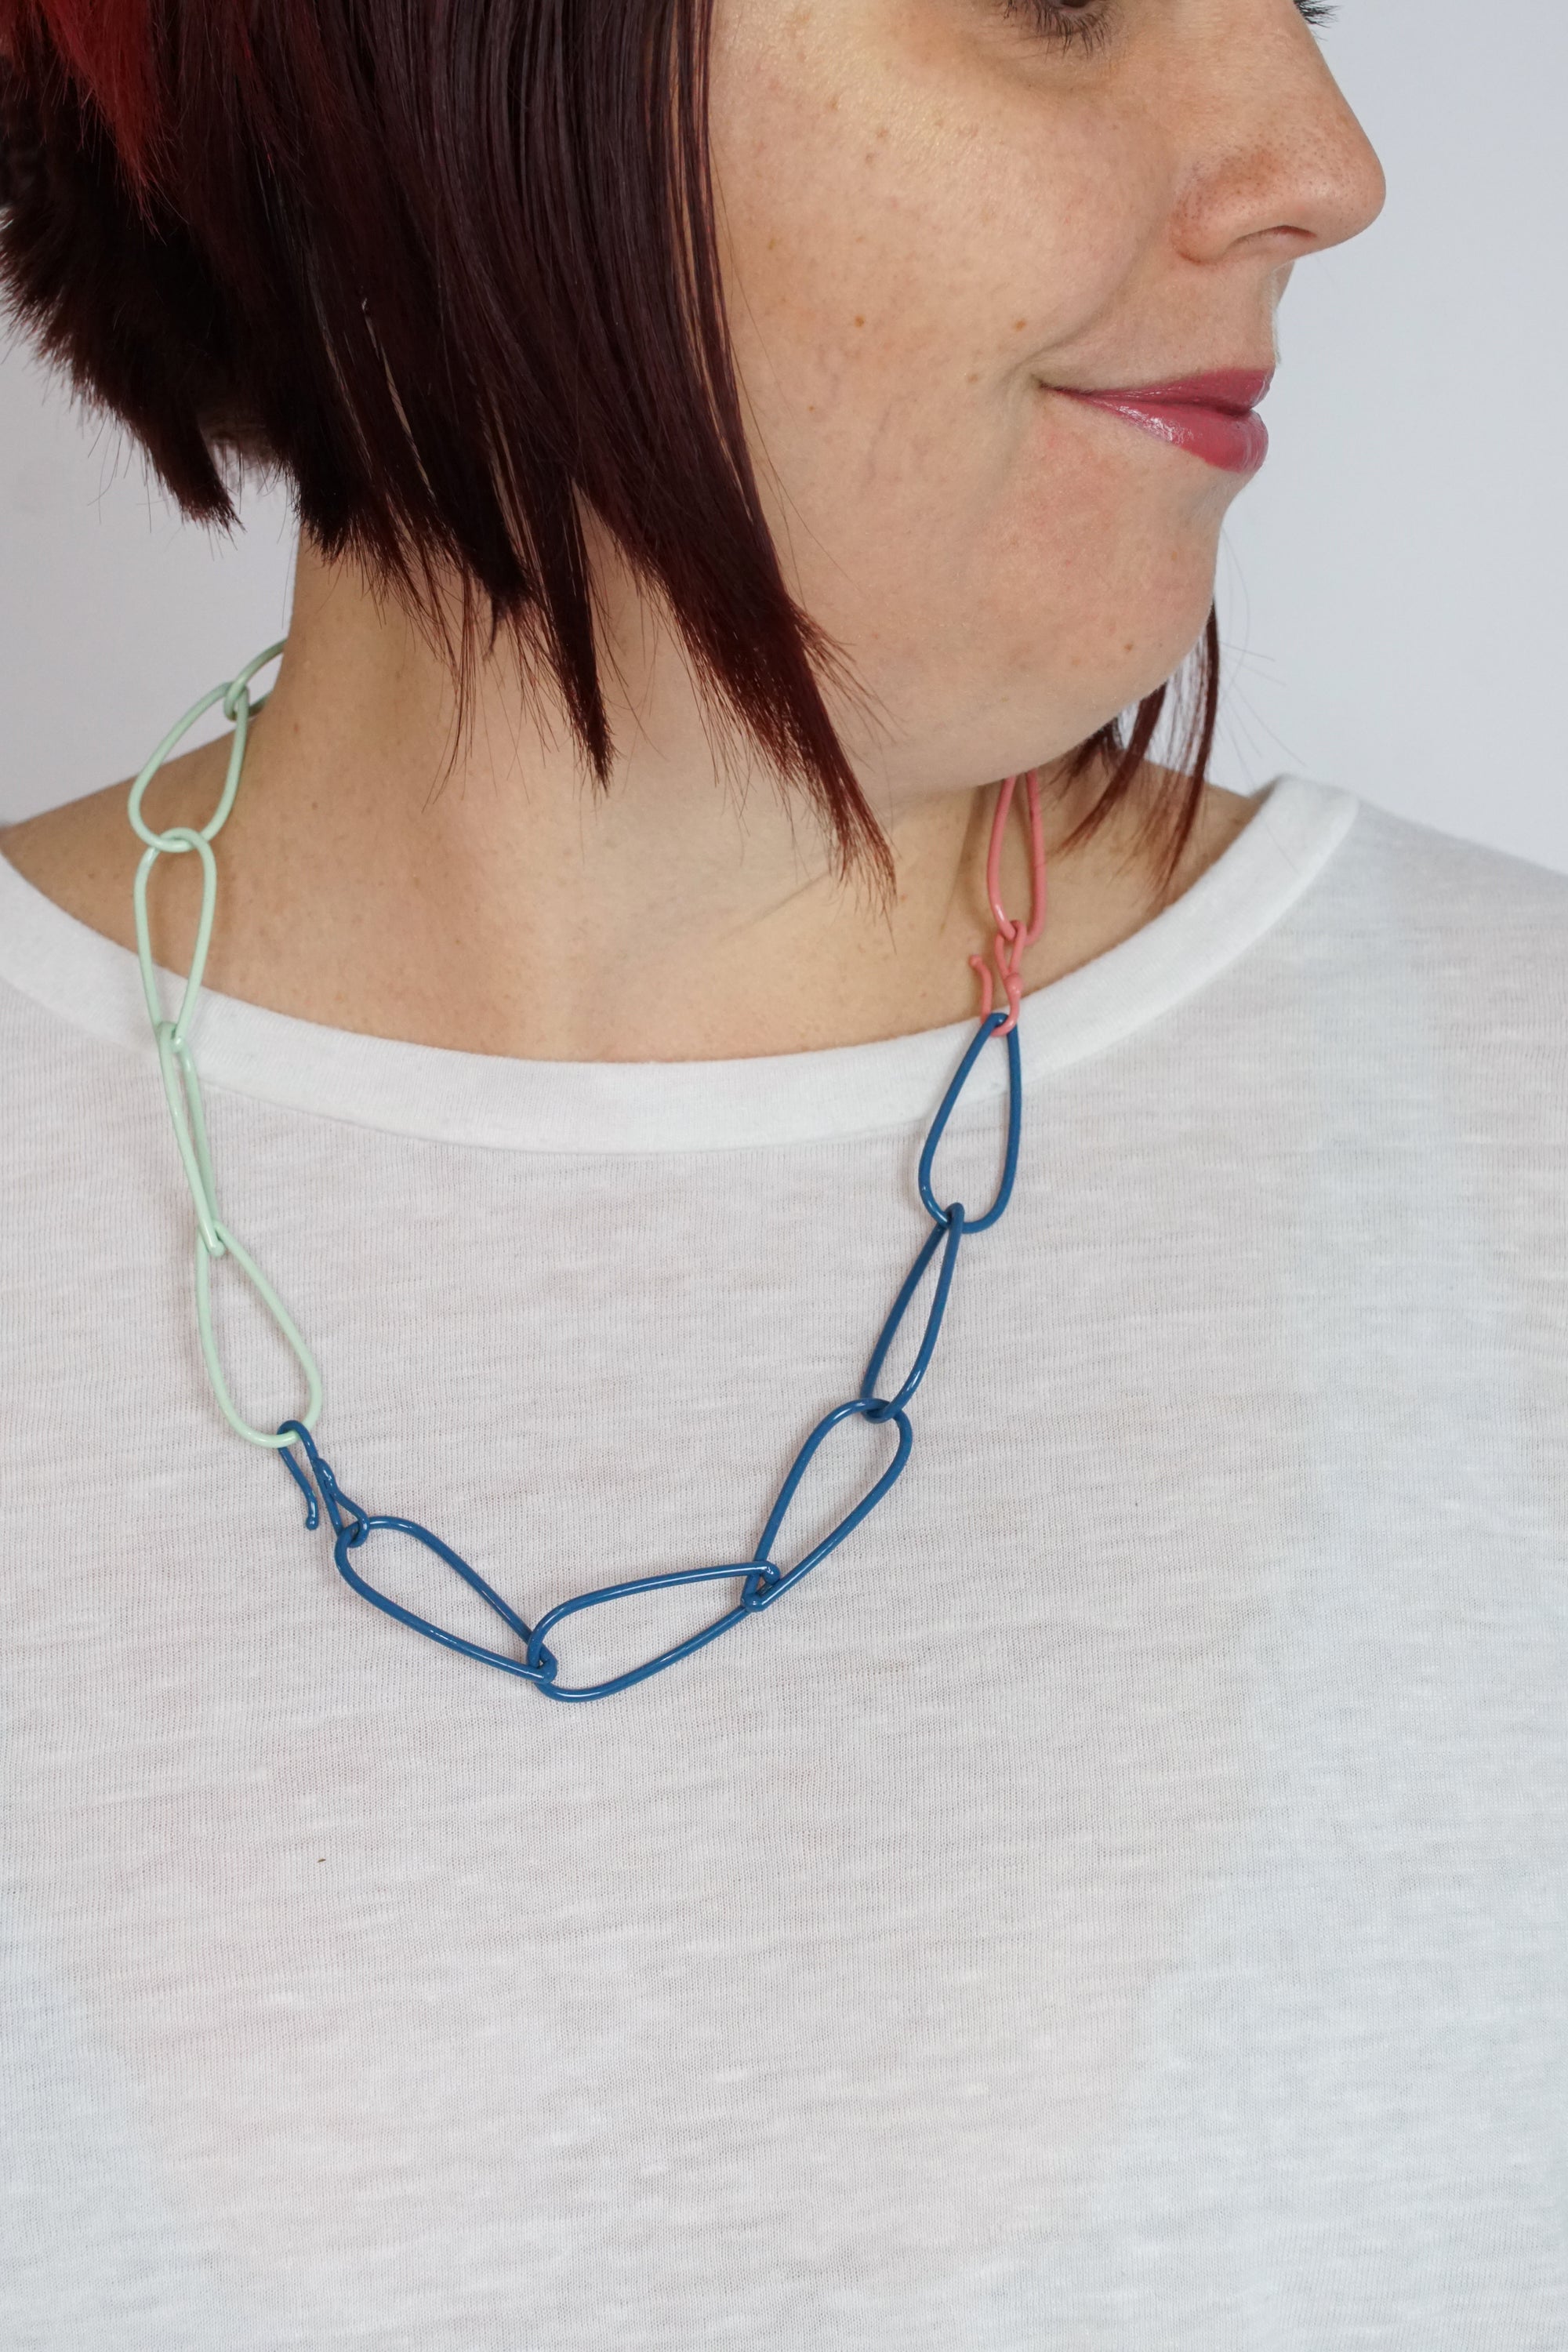 Modular Necklace in Azure Blue, Light Raspberry, and Soft Mint